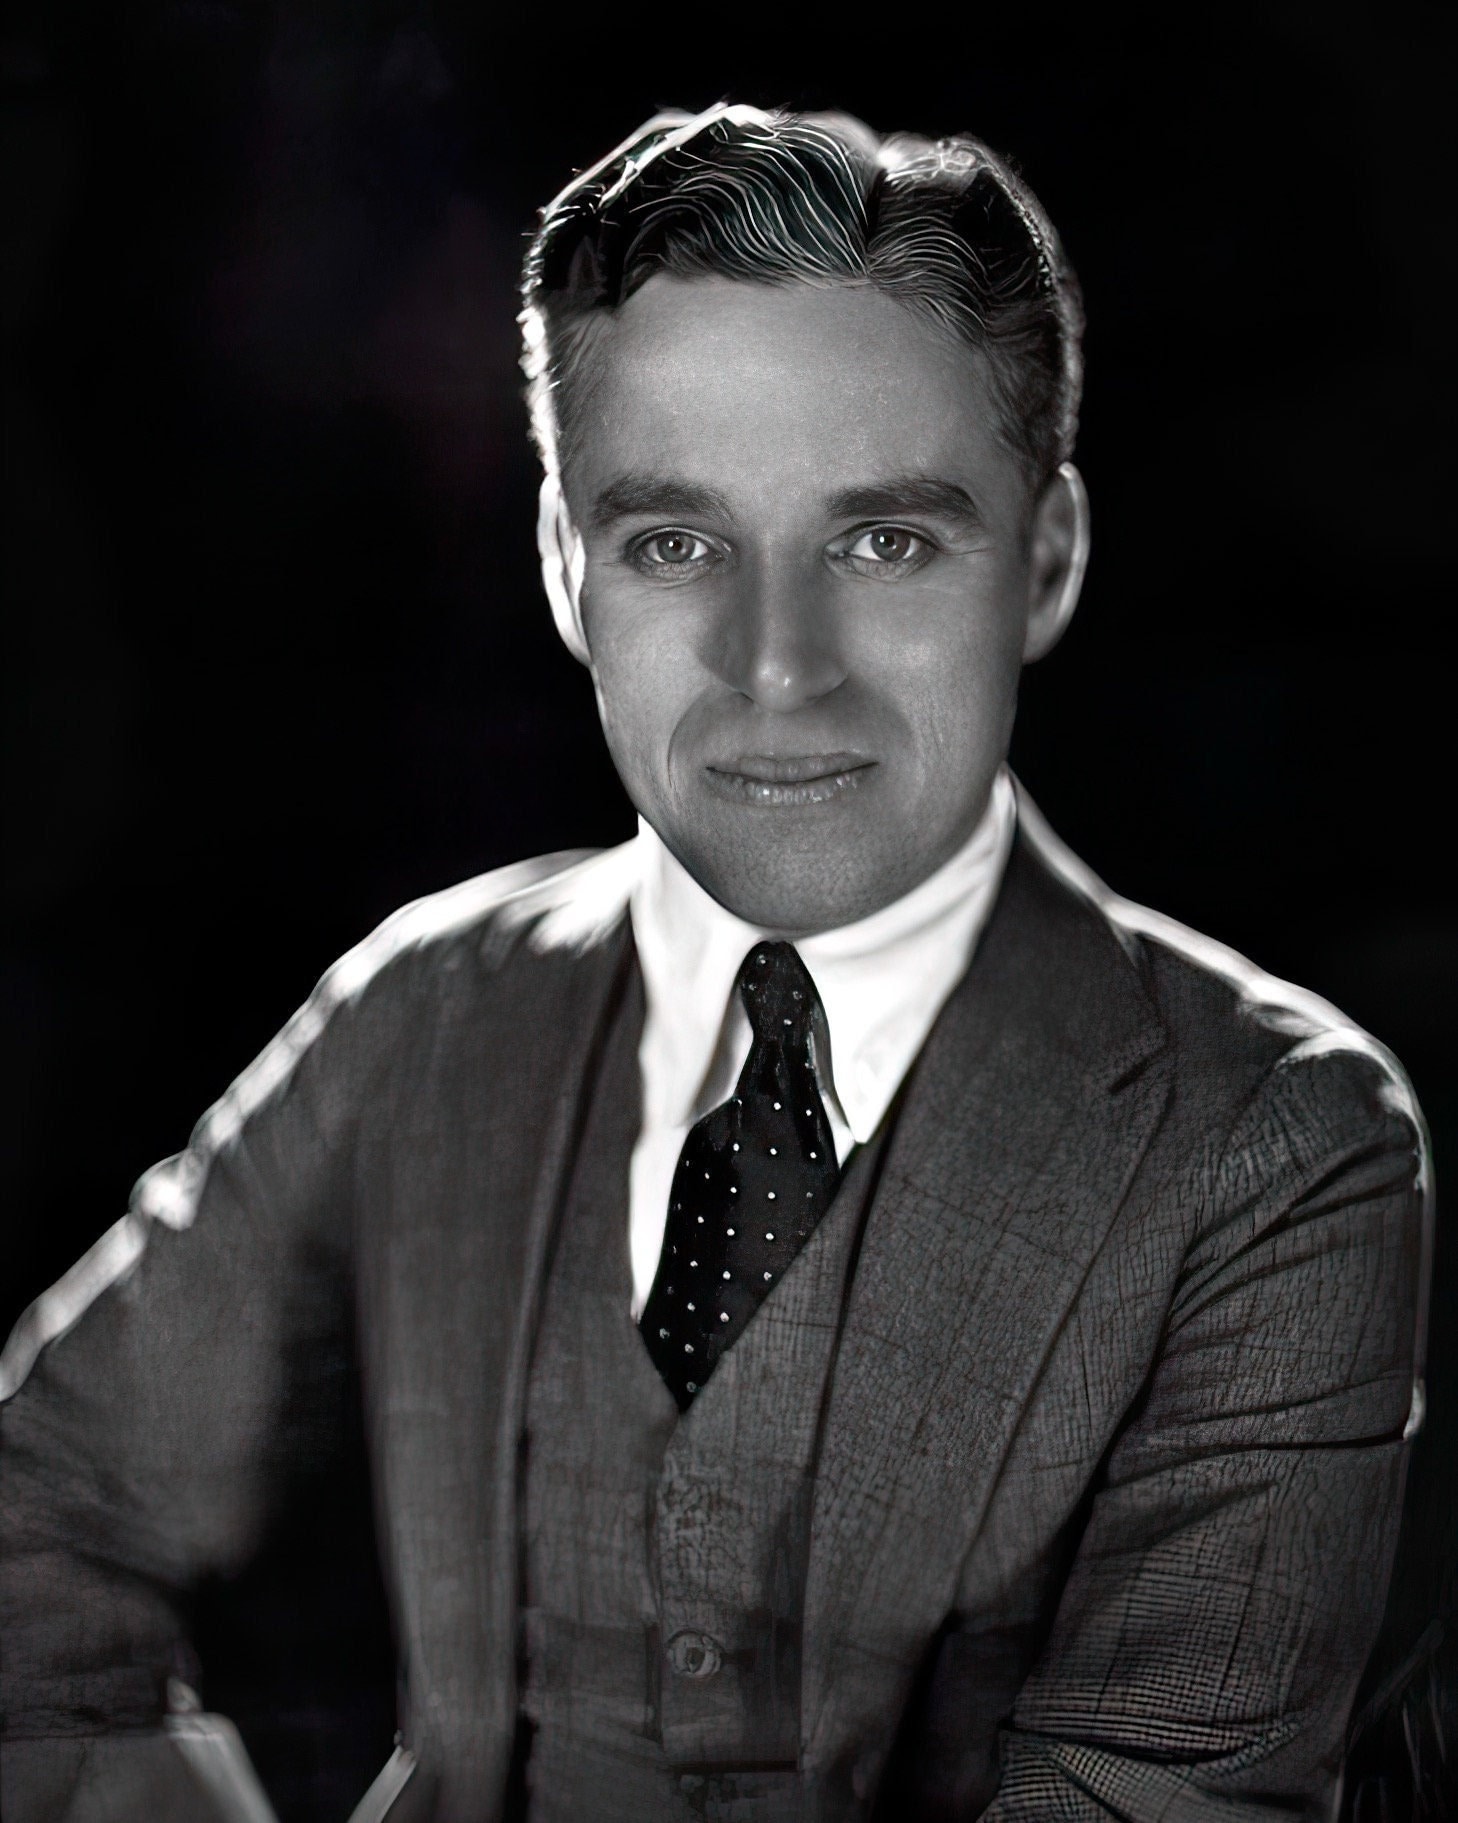 Charlie Chaplin Photographed by Abbe C. 1922 Black & White, Multiple Sizes Old Hollywood, Classic Actor, the Tramp 730-1250 - Etsy Canada